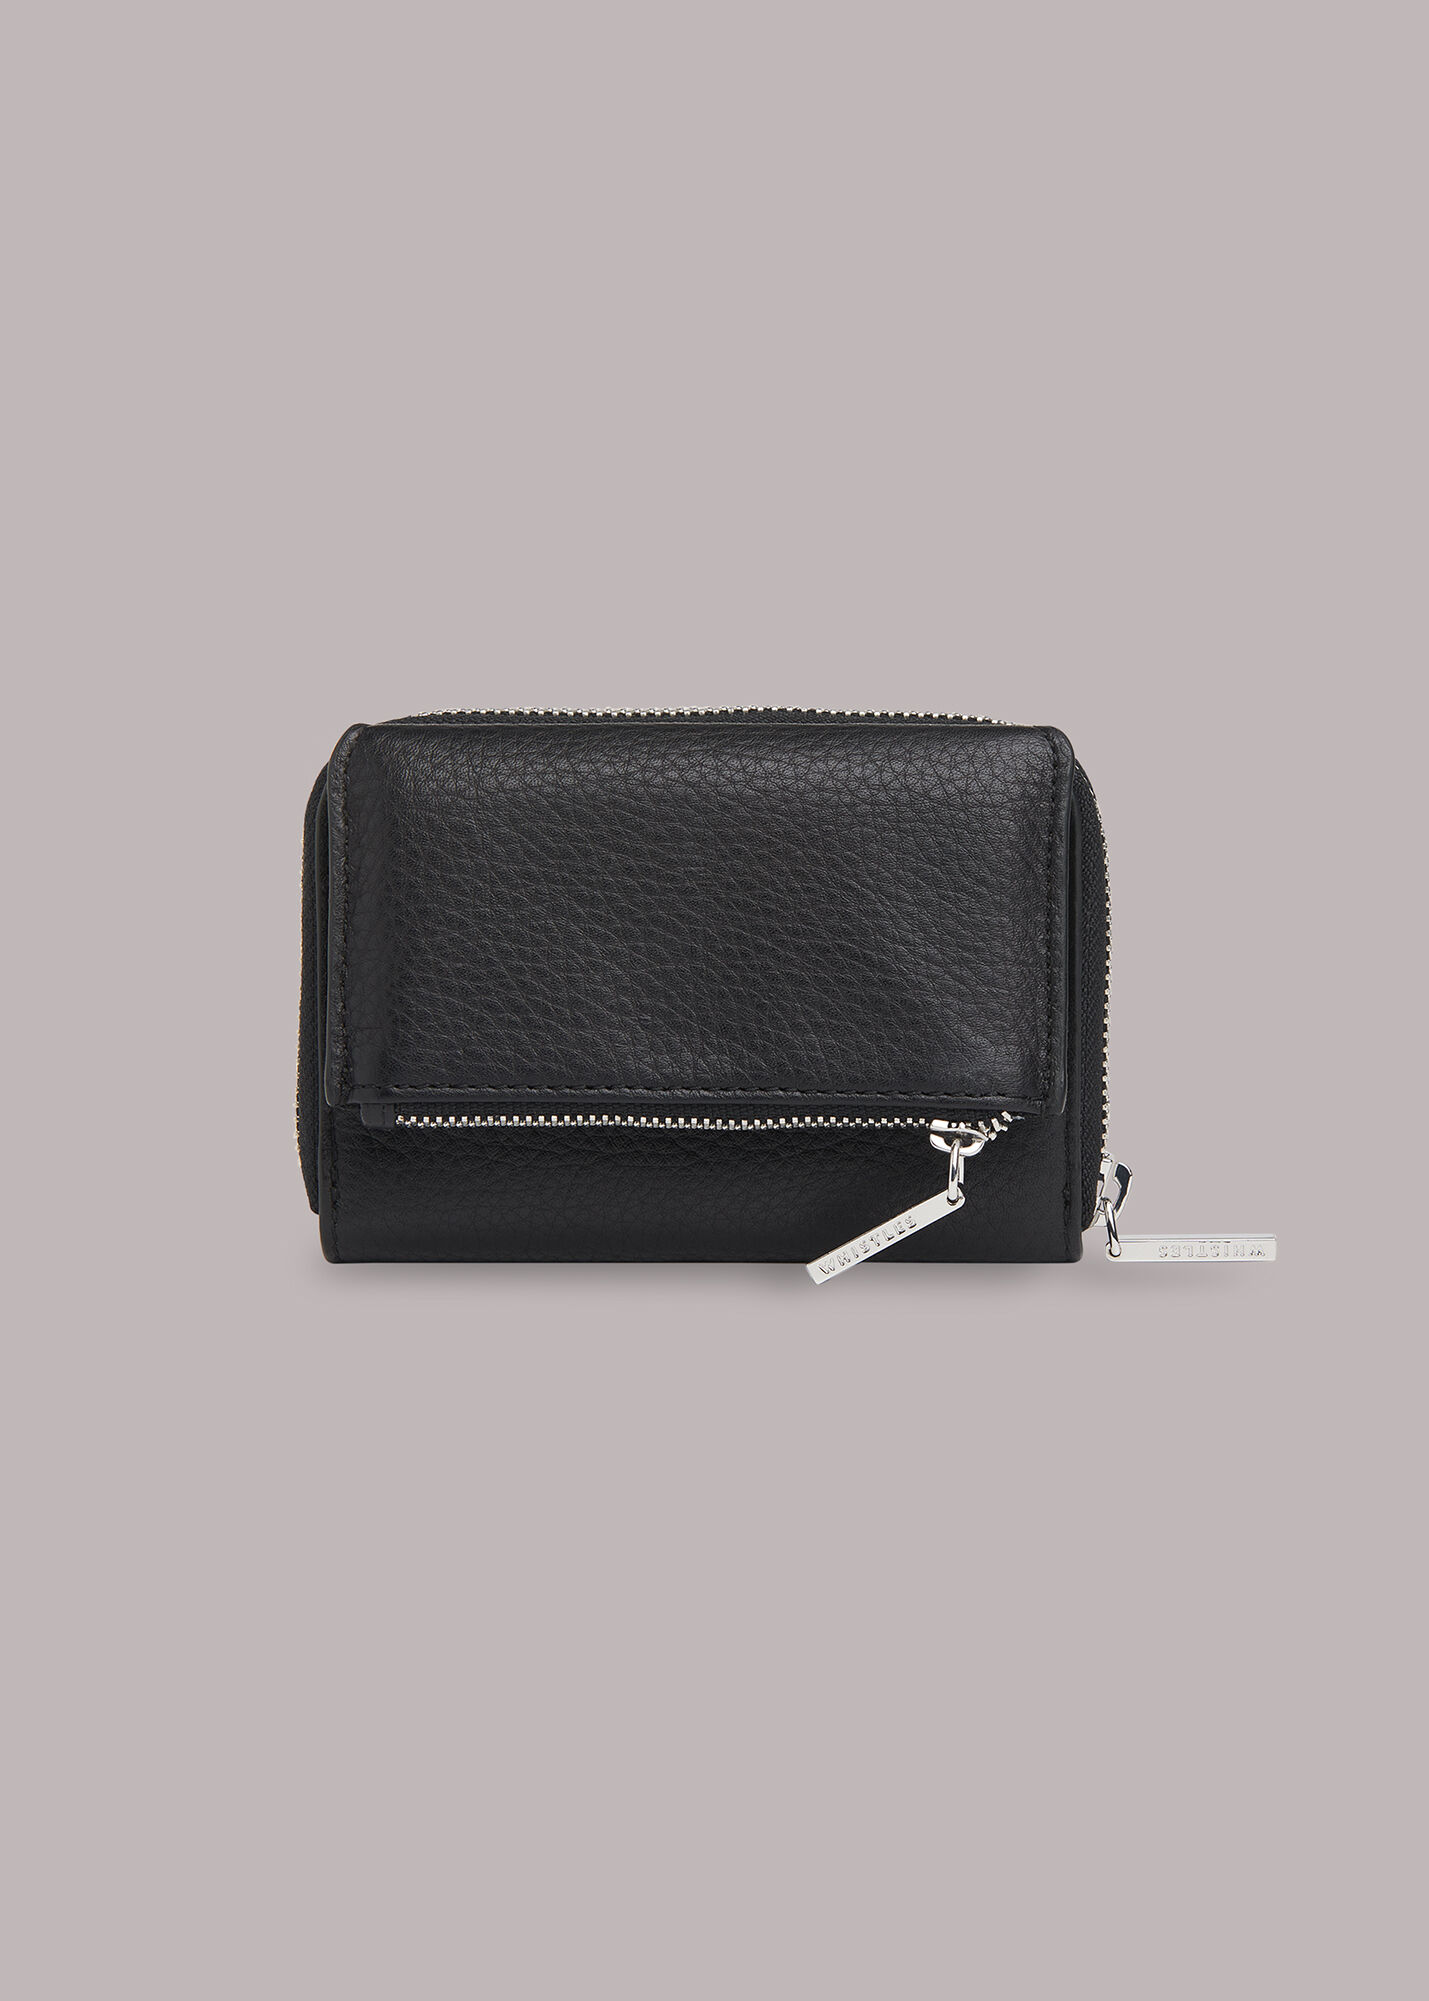 Leather Zipper Pouch - Made in USA - 9